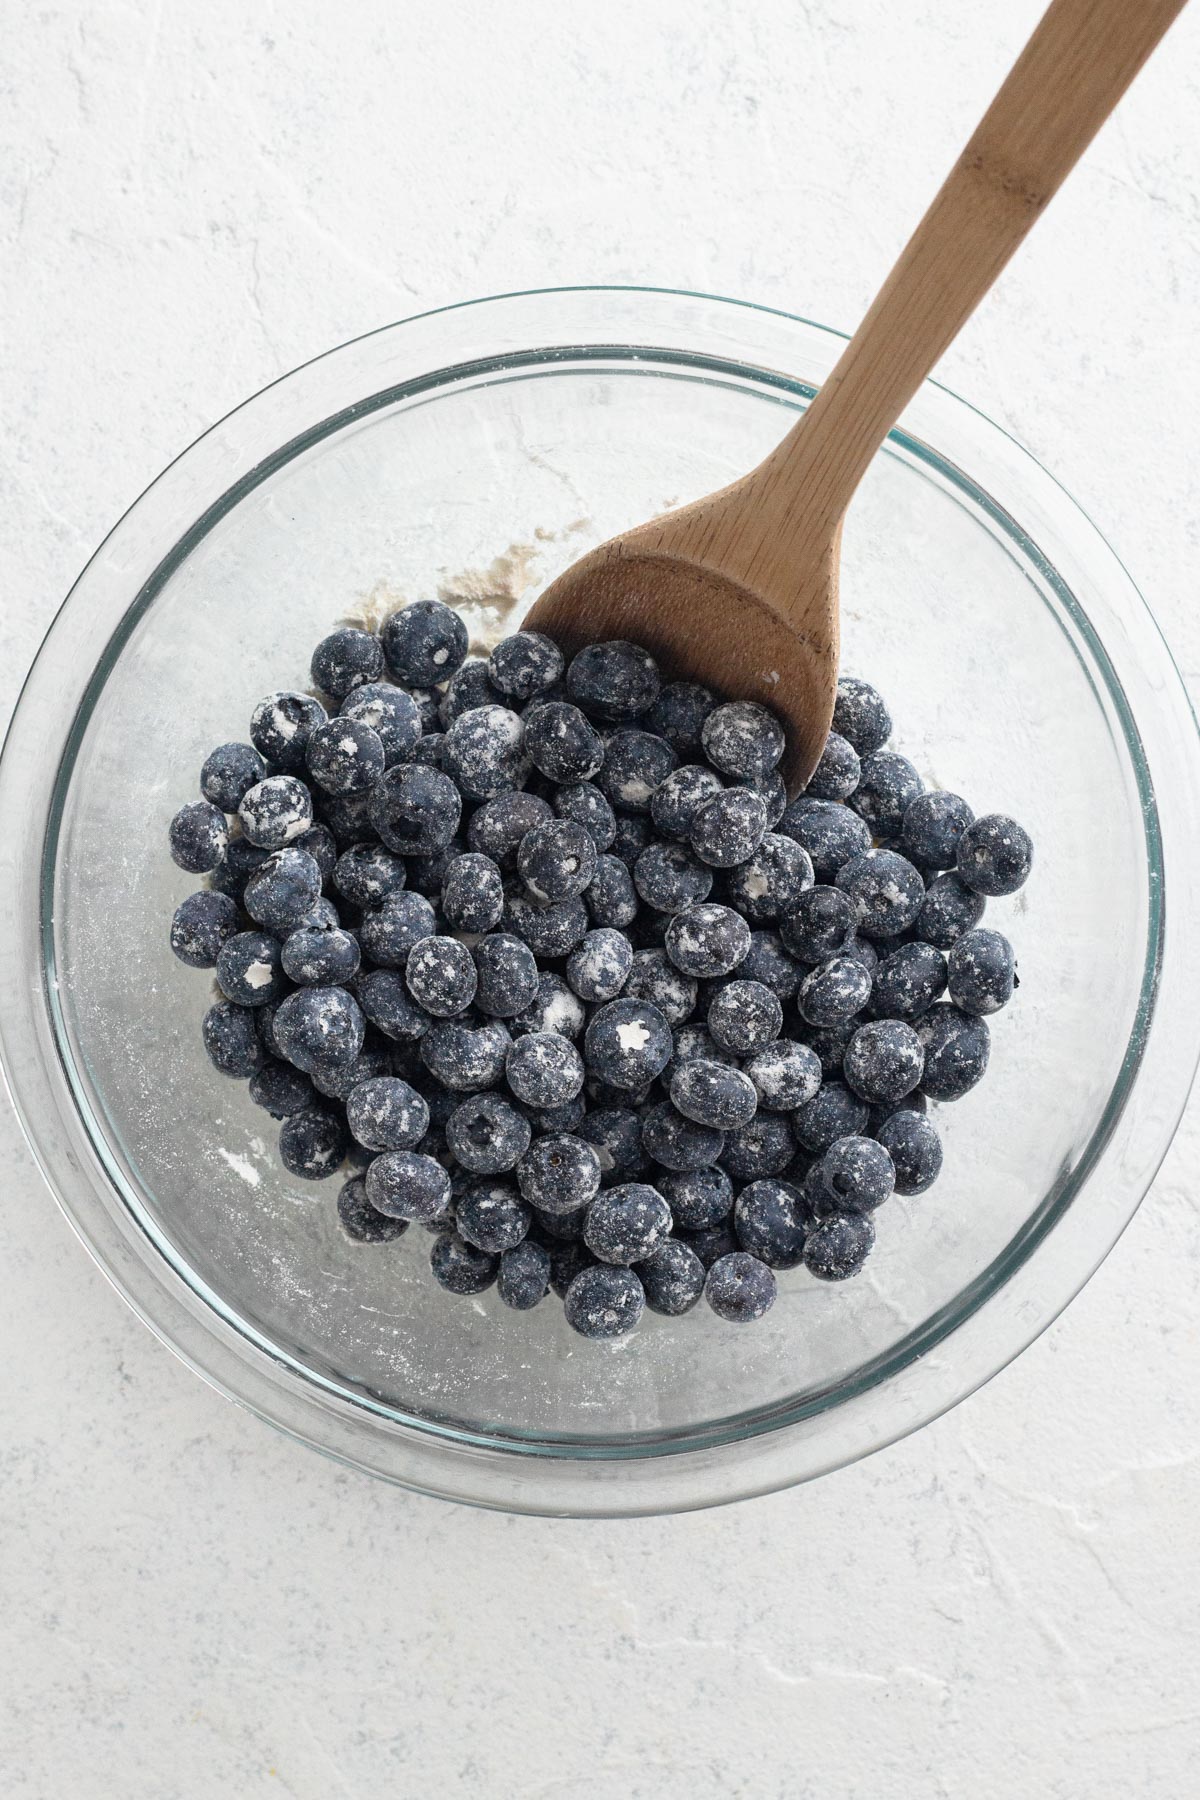 Fresh blueberries tossed in flour in a glass mixing bowl with a wooden spoon.